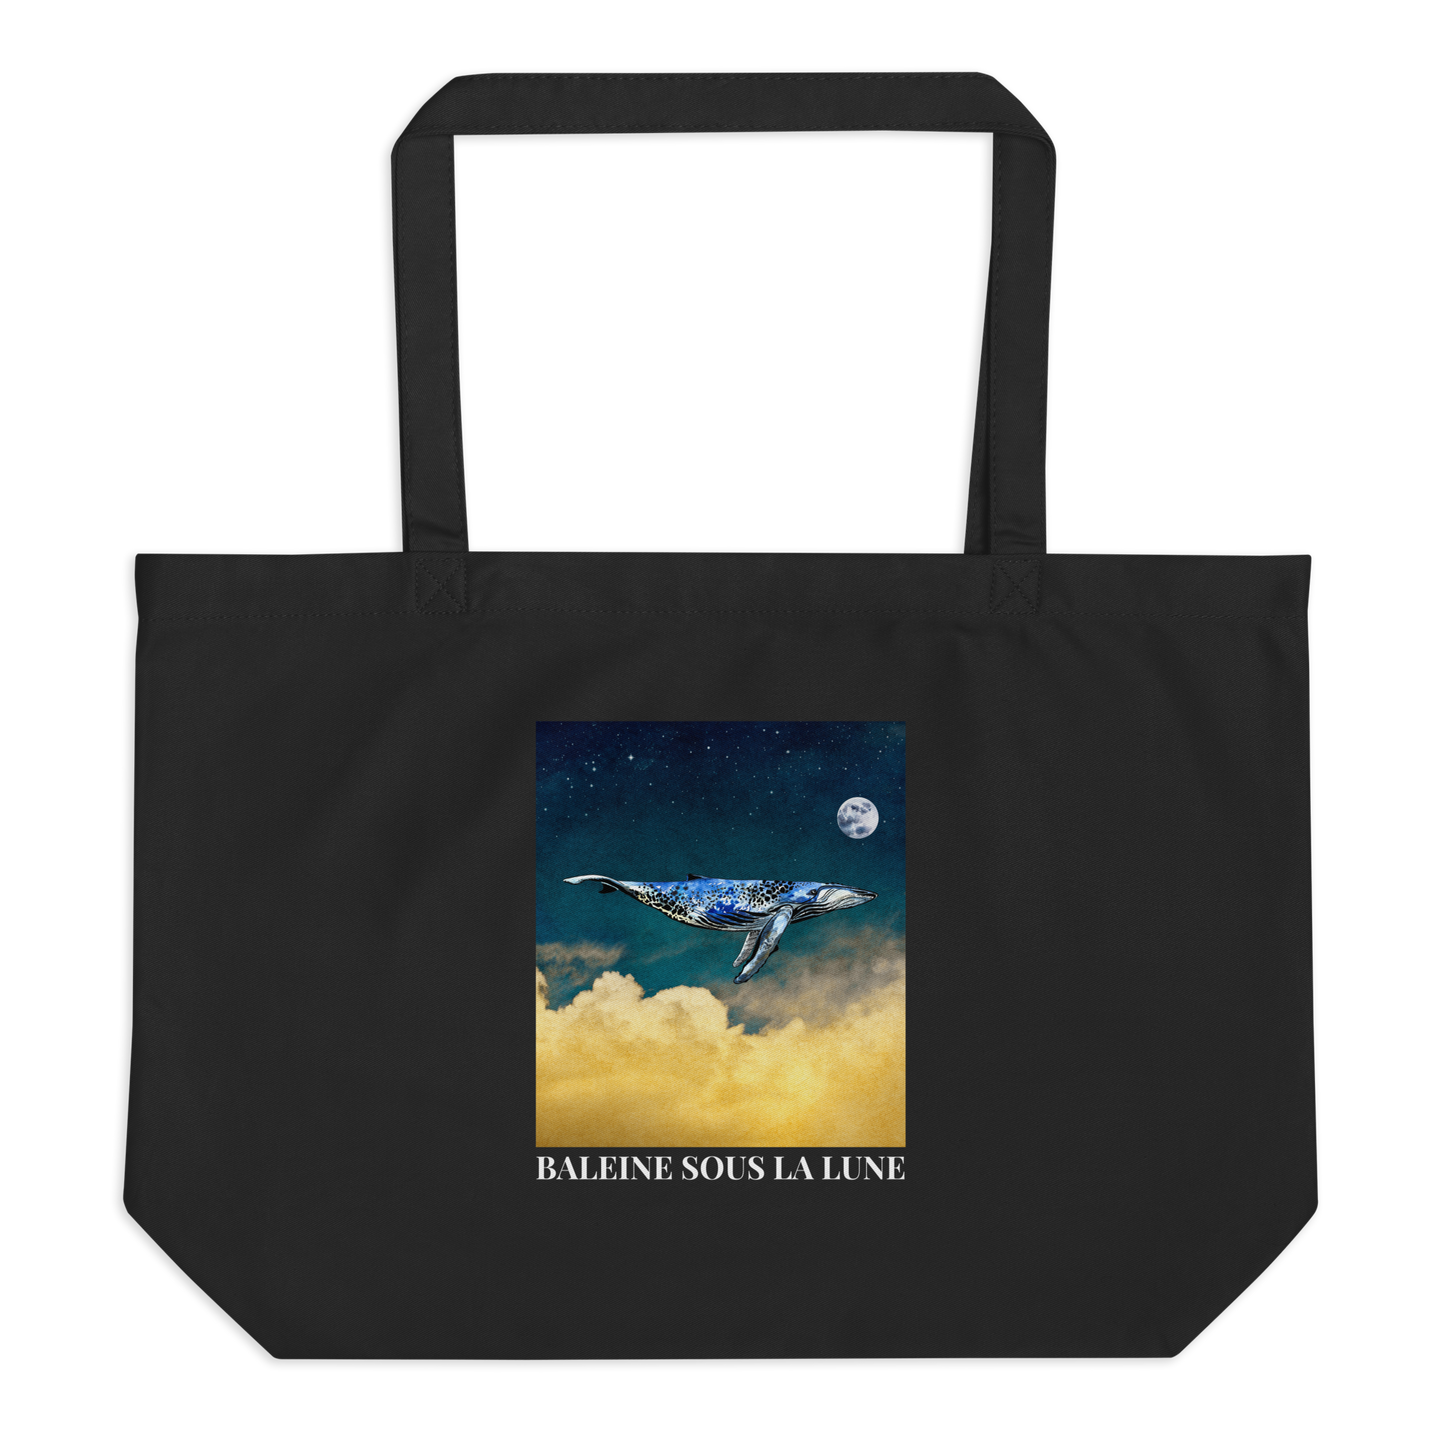 Black Whale Eco Tote Bag featuring a majestic Whale Under The Moon graphic - Shop Large Organic Cotton Tote Bags Online - Boozy Fox